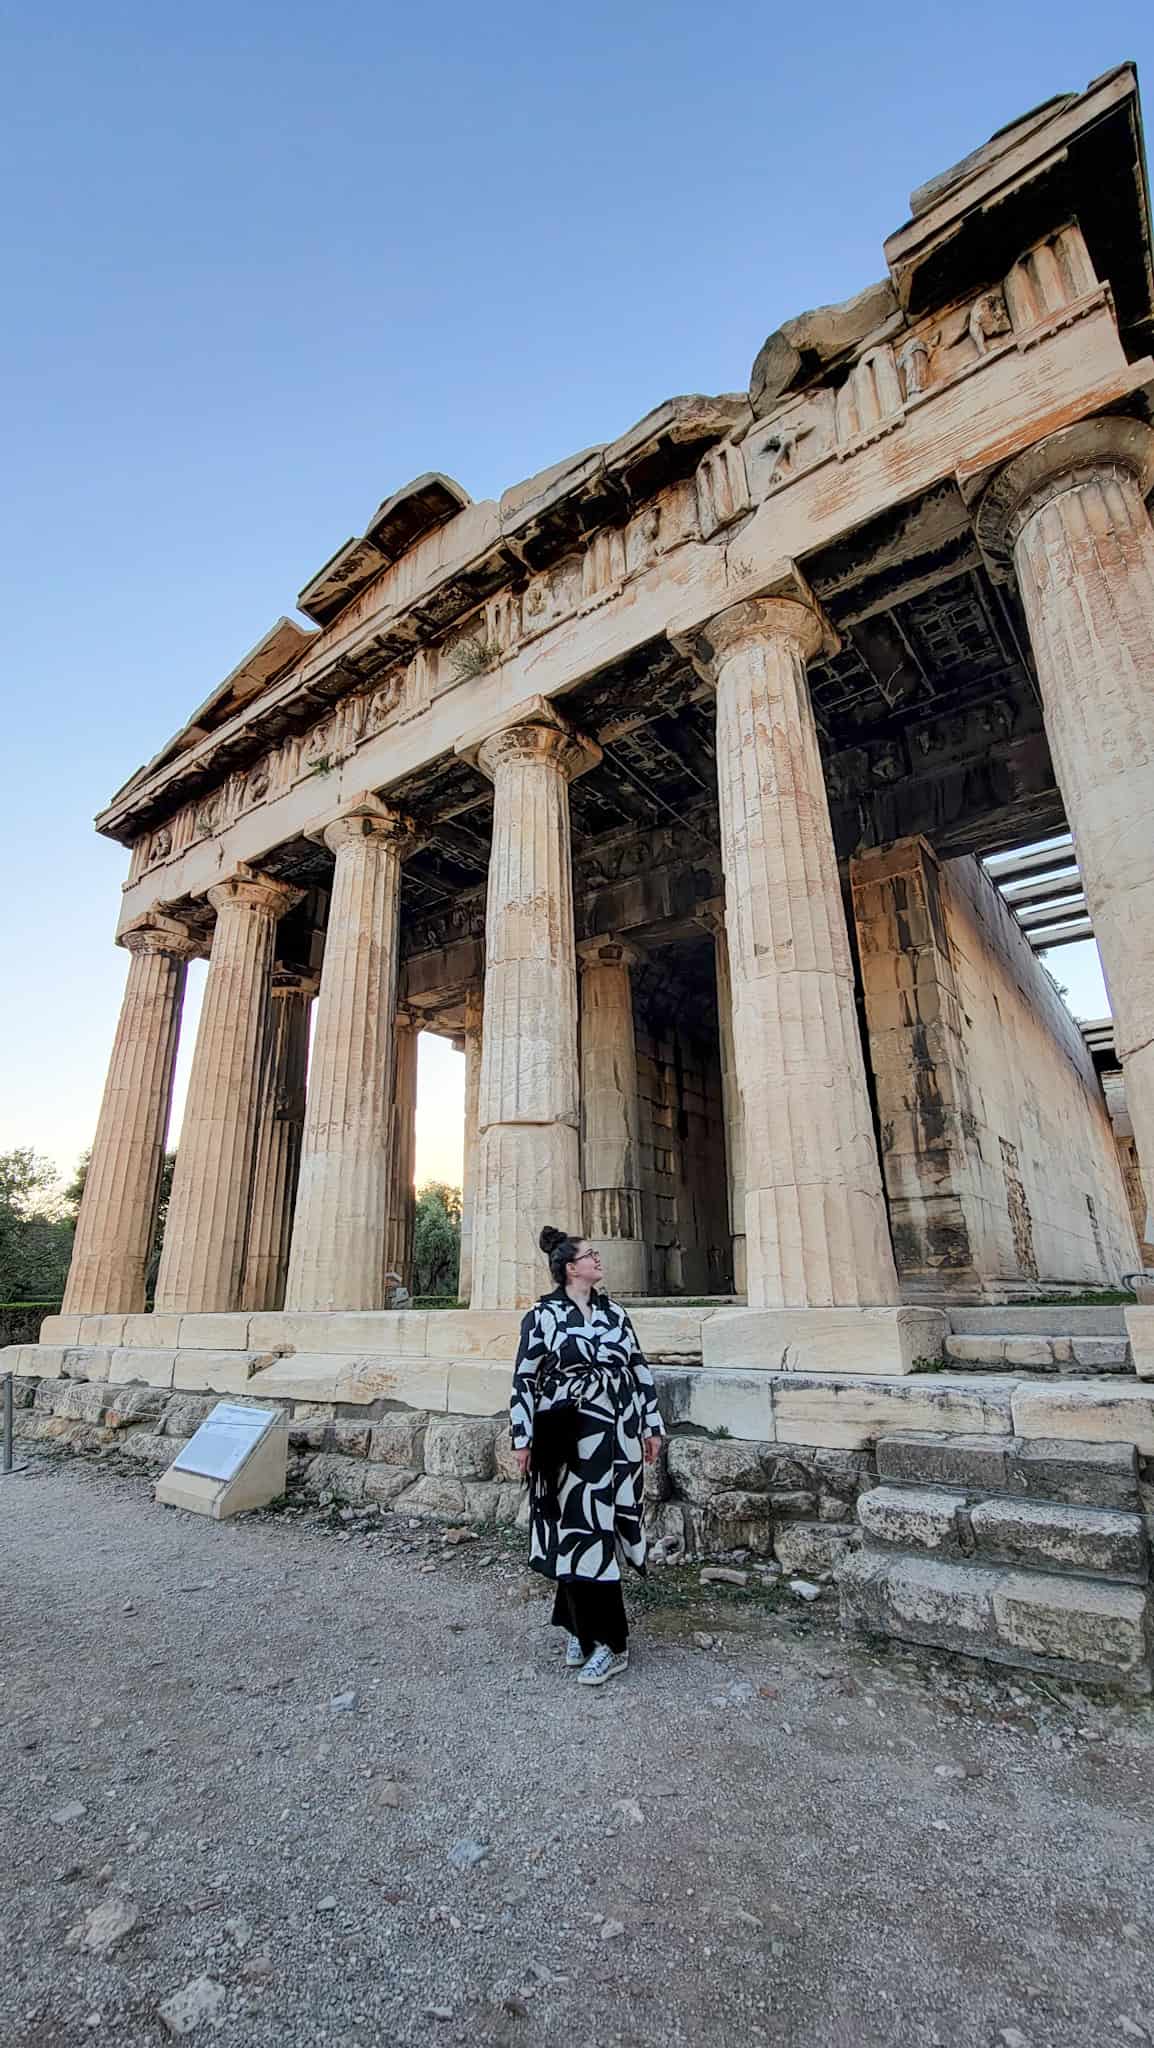 Instagrammable places in Athens: 10 most beautiful spots